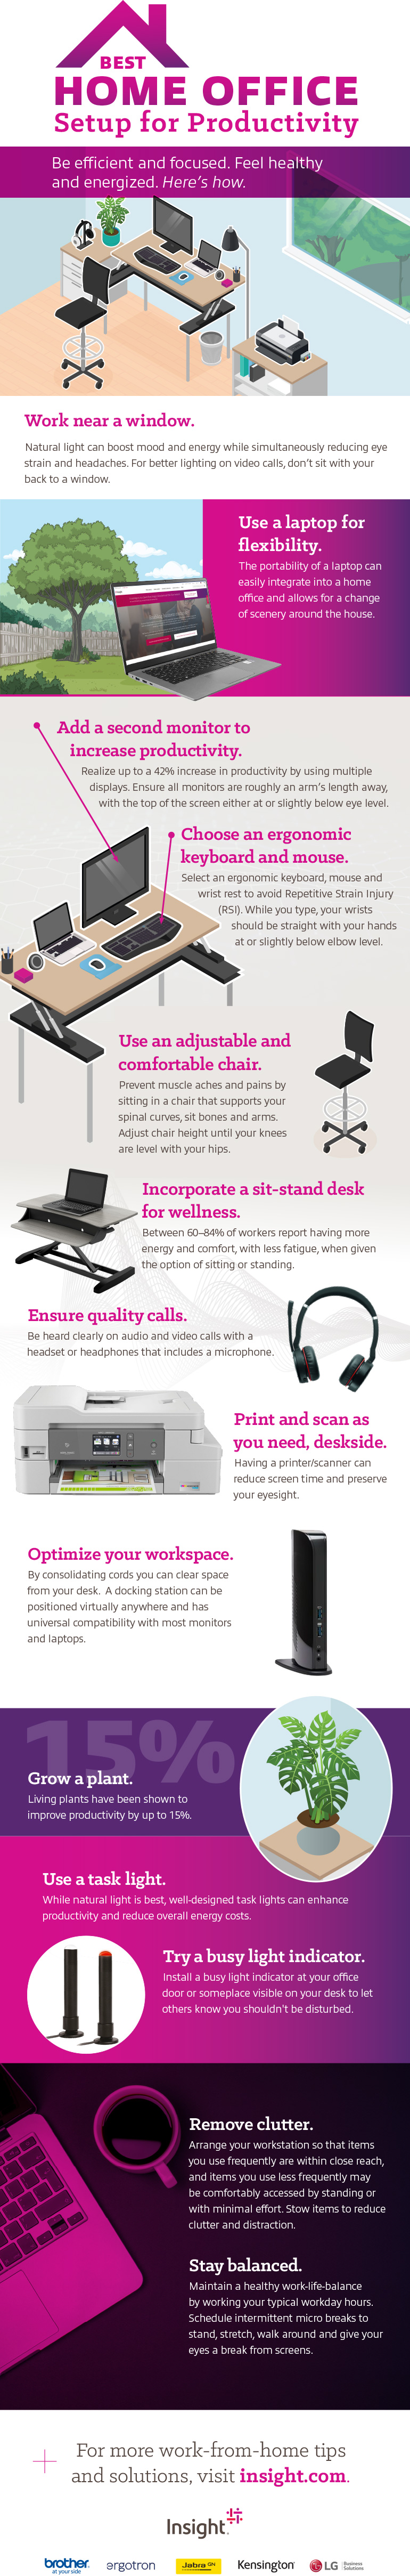 15 Desk Essentials for a Productive Workday